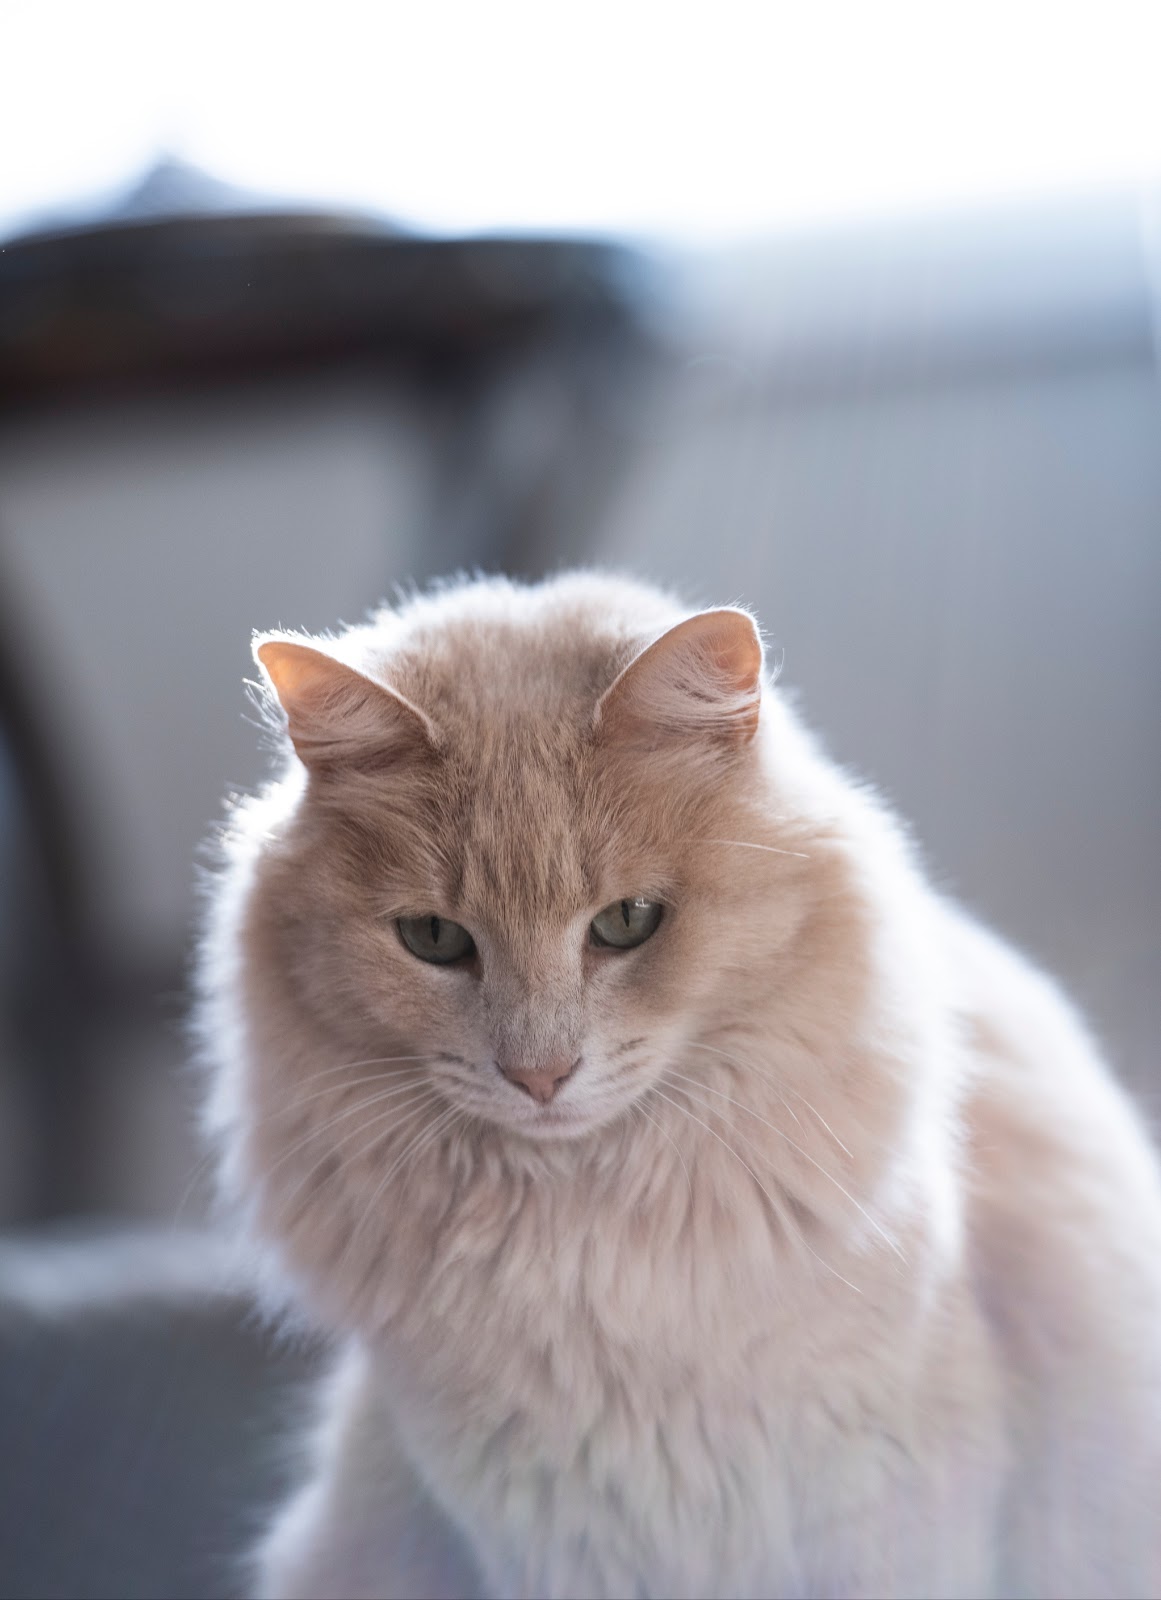 home remedies for ear mites in cats